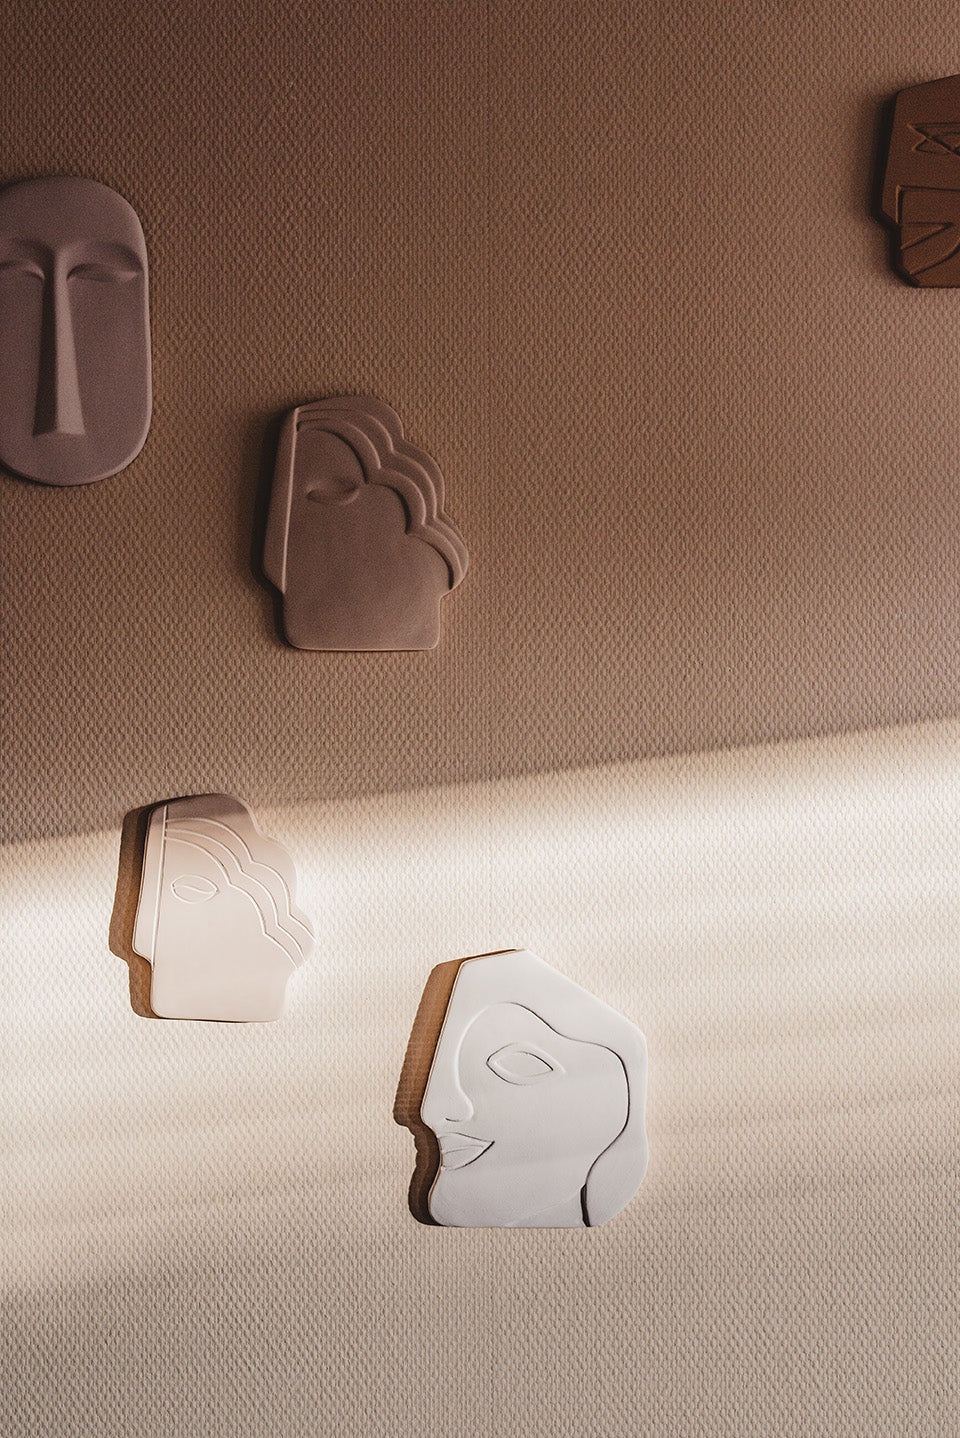 HKliving | FACE WALL ORNAMENT SMALL - SHINY TAUPE